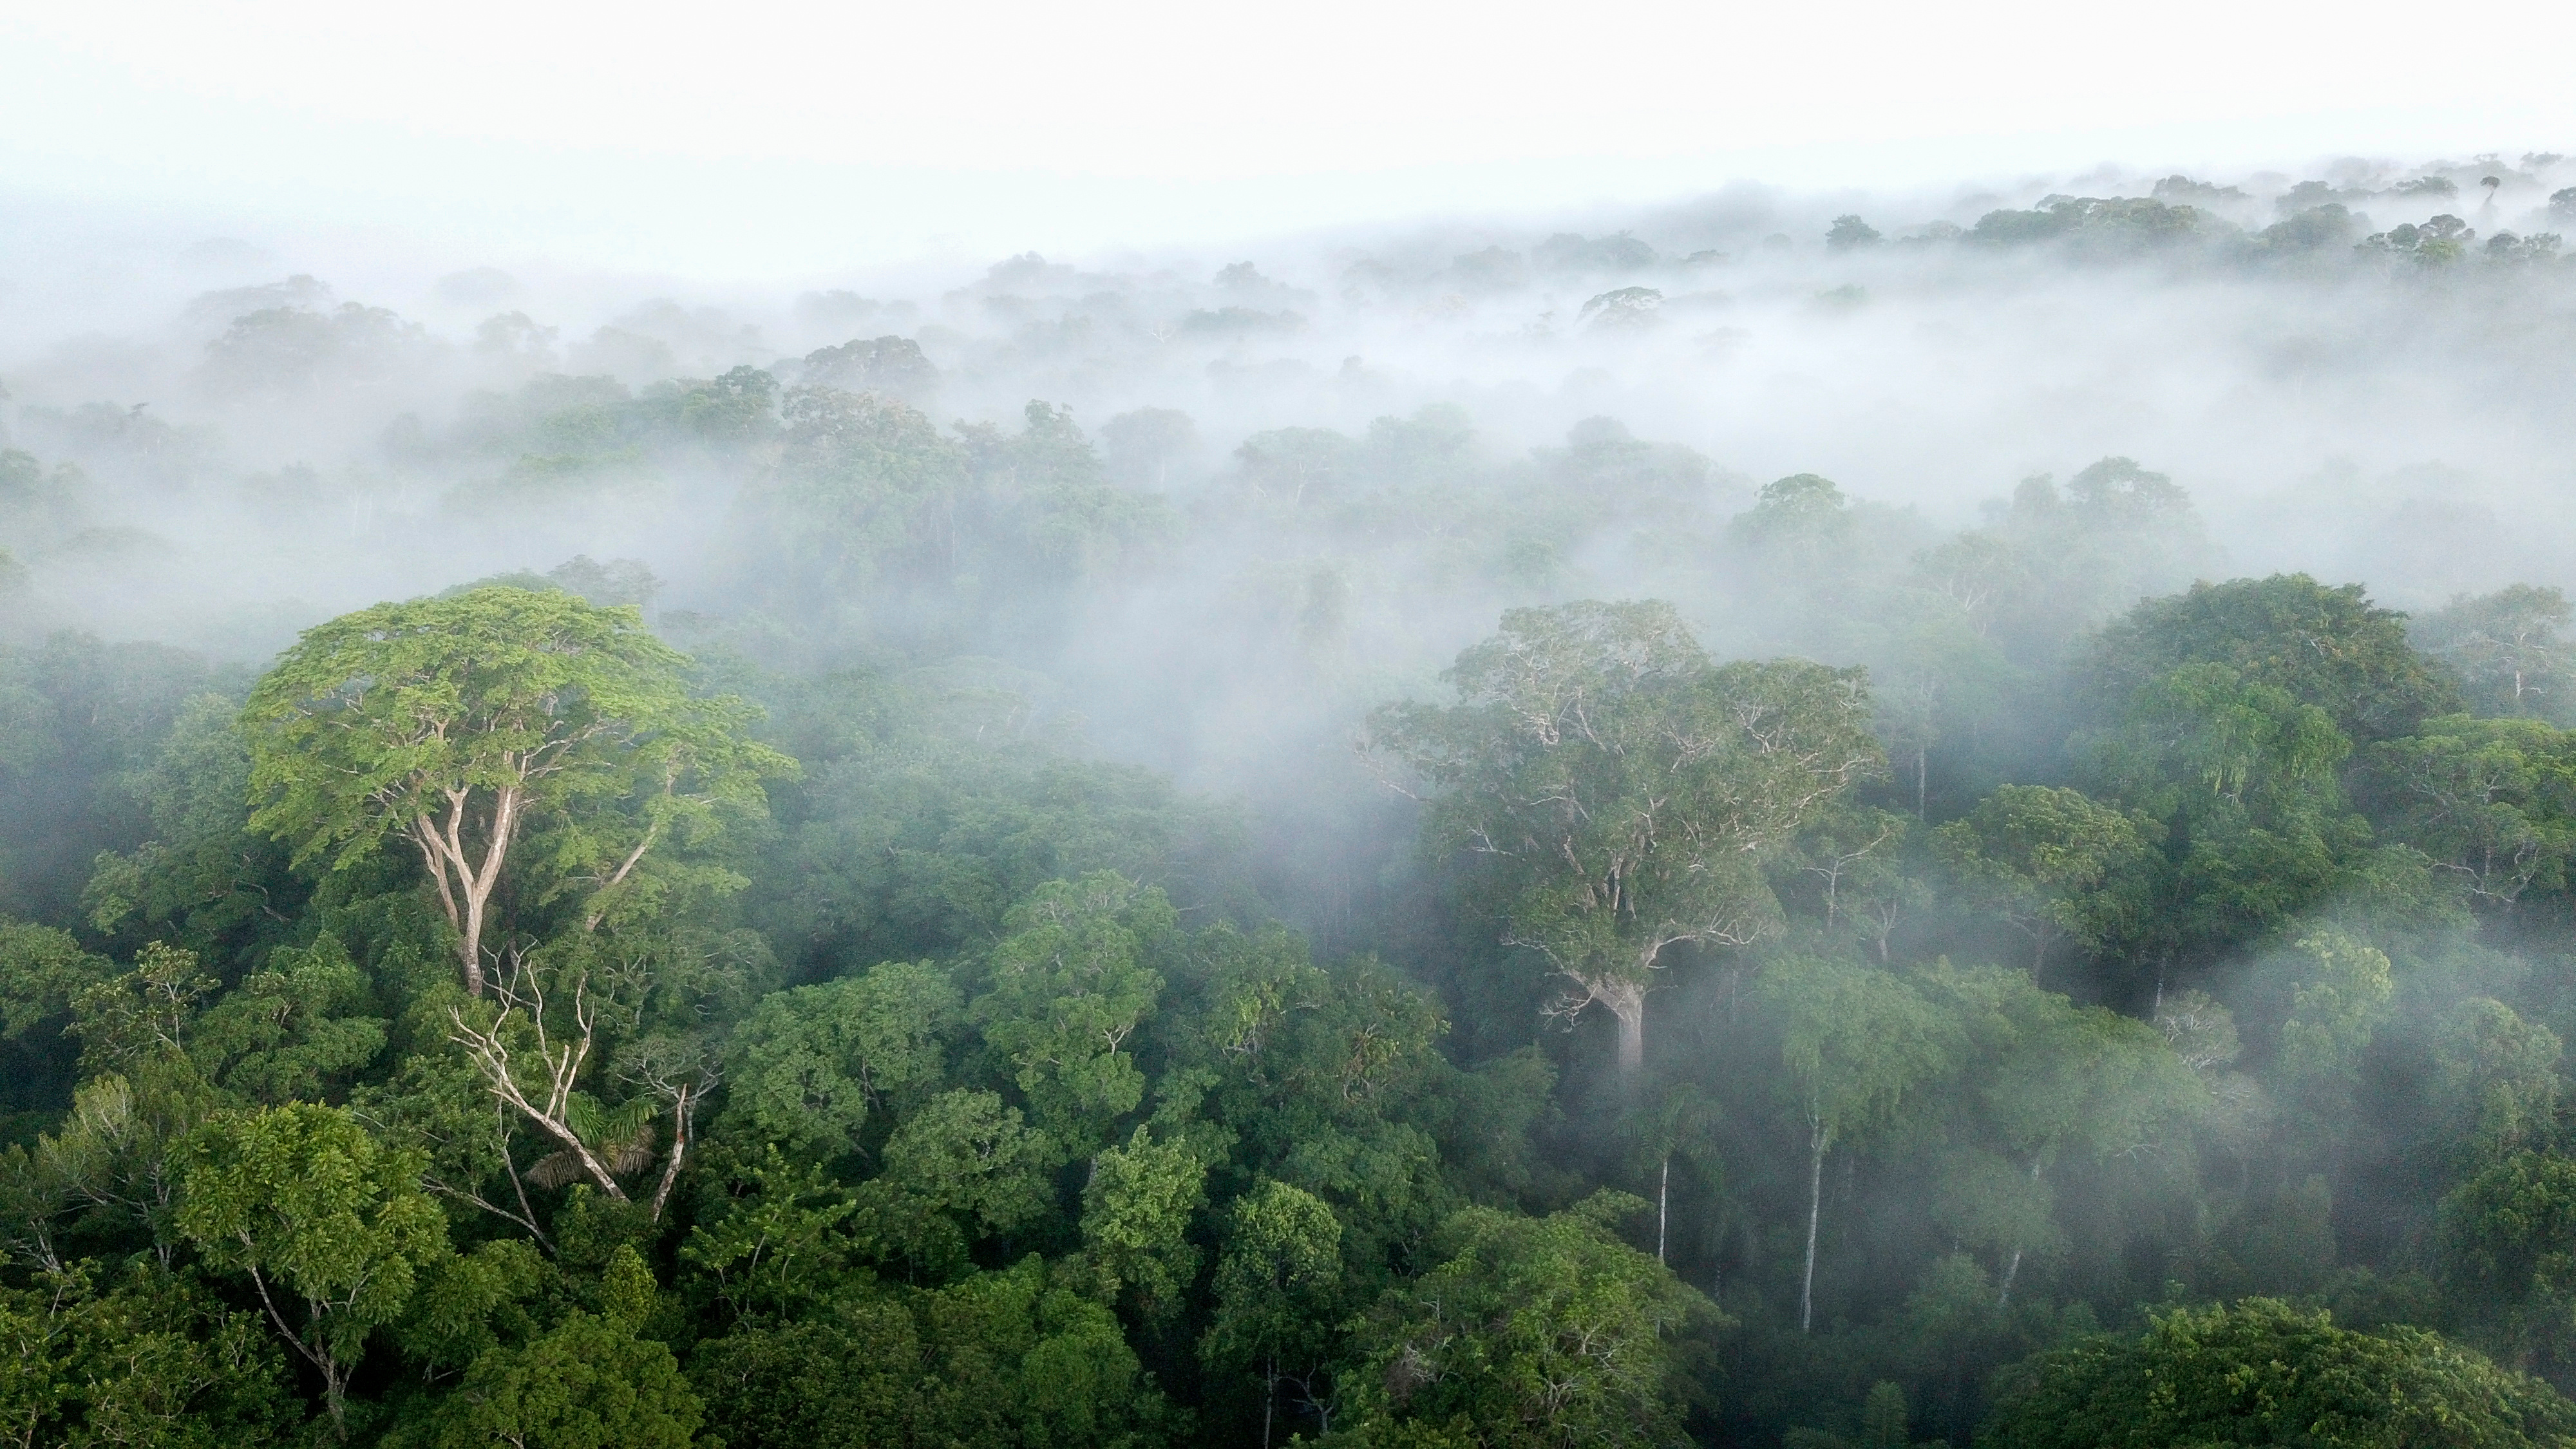 A view from above of a tropical forest with a thin layer of clouds.